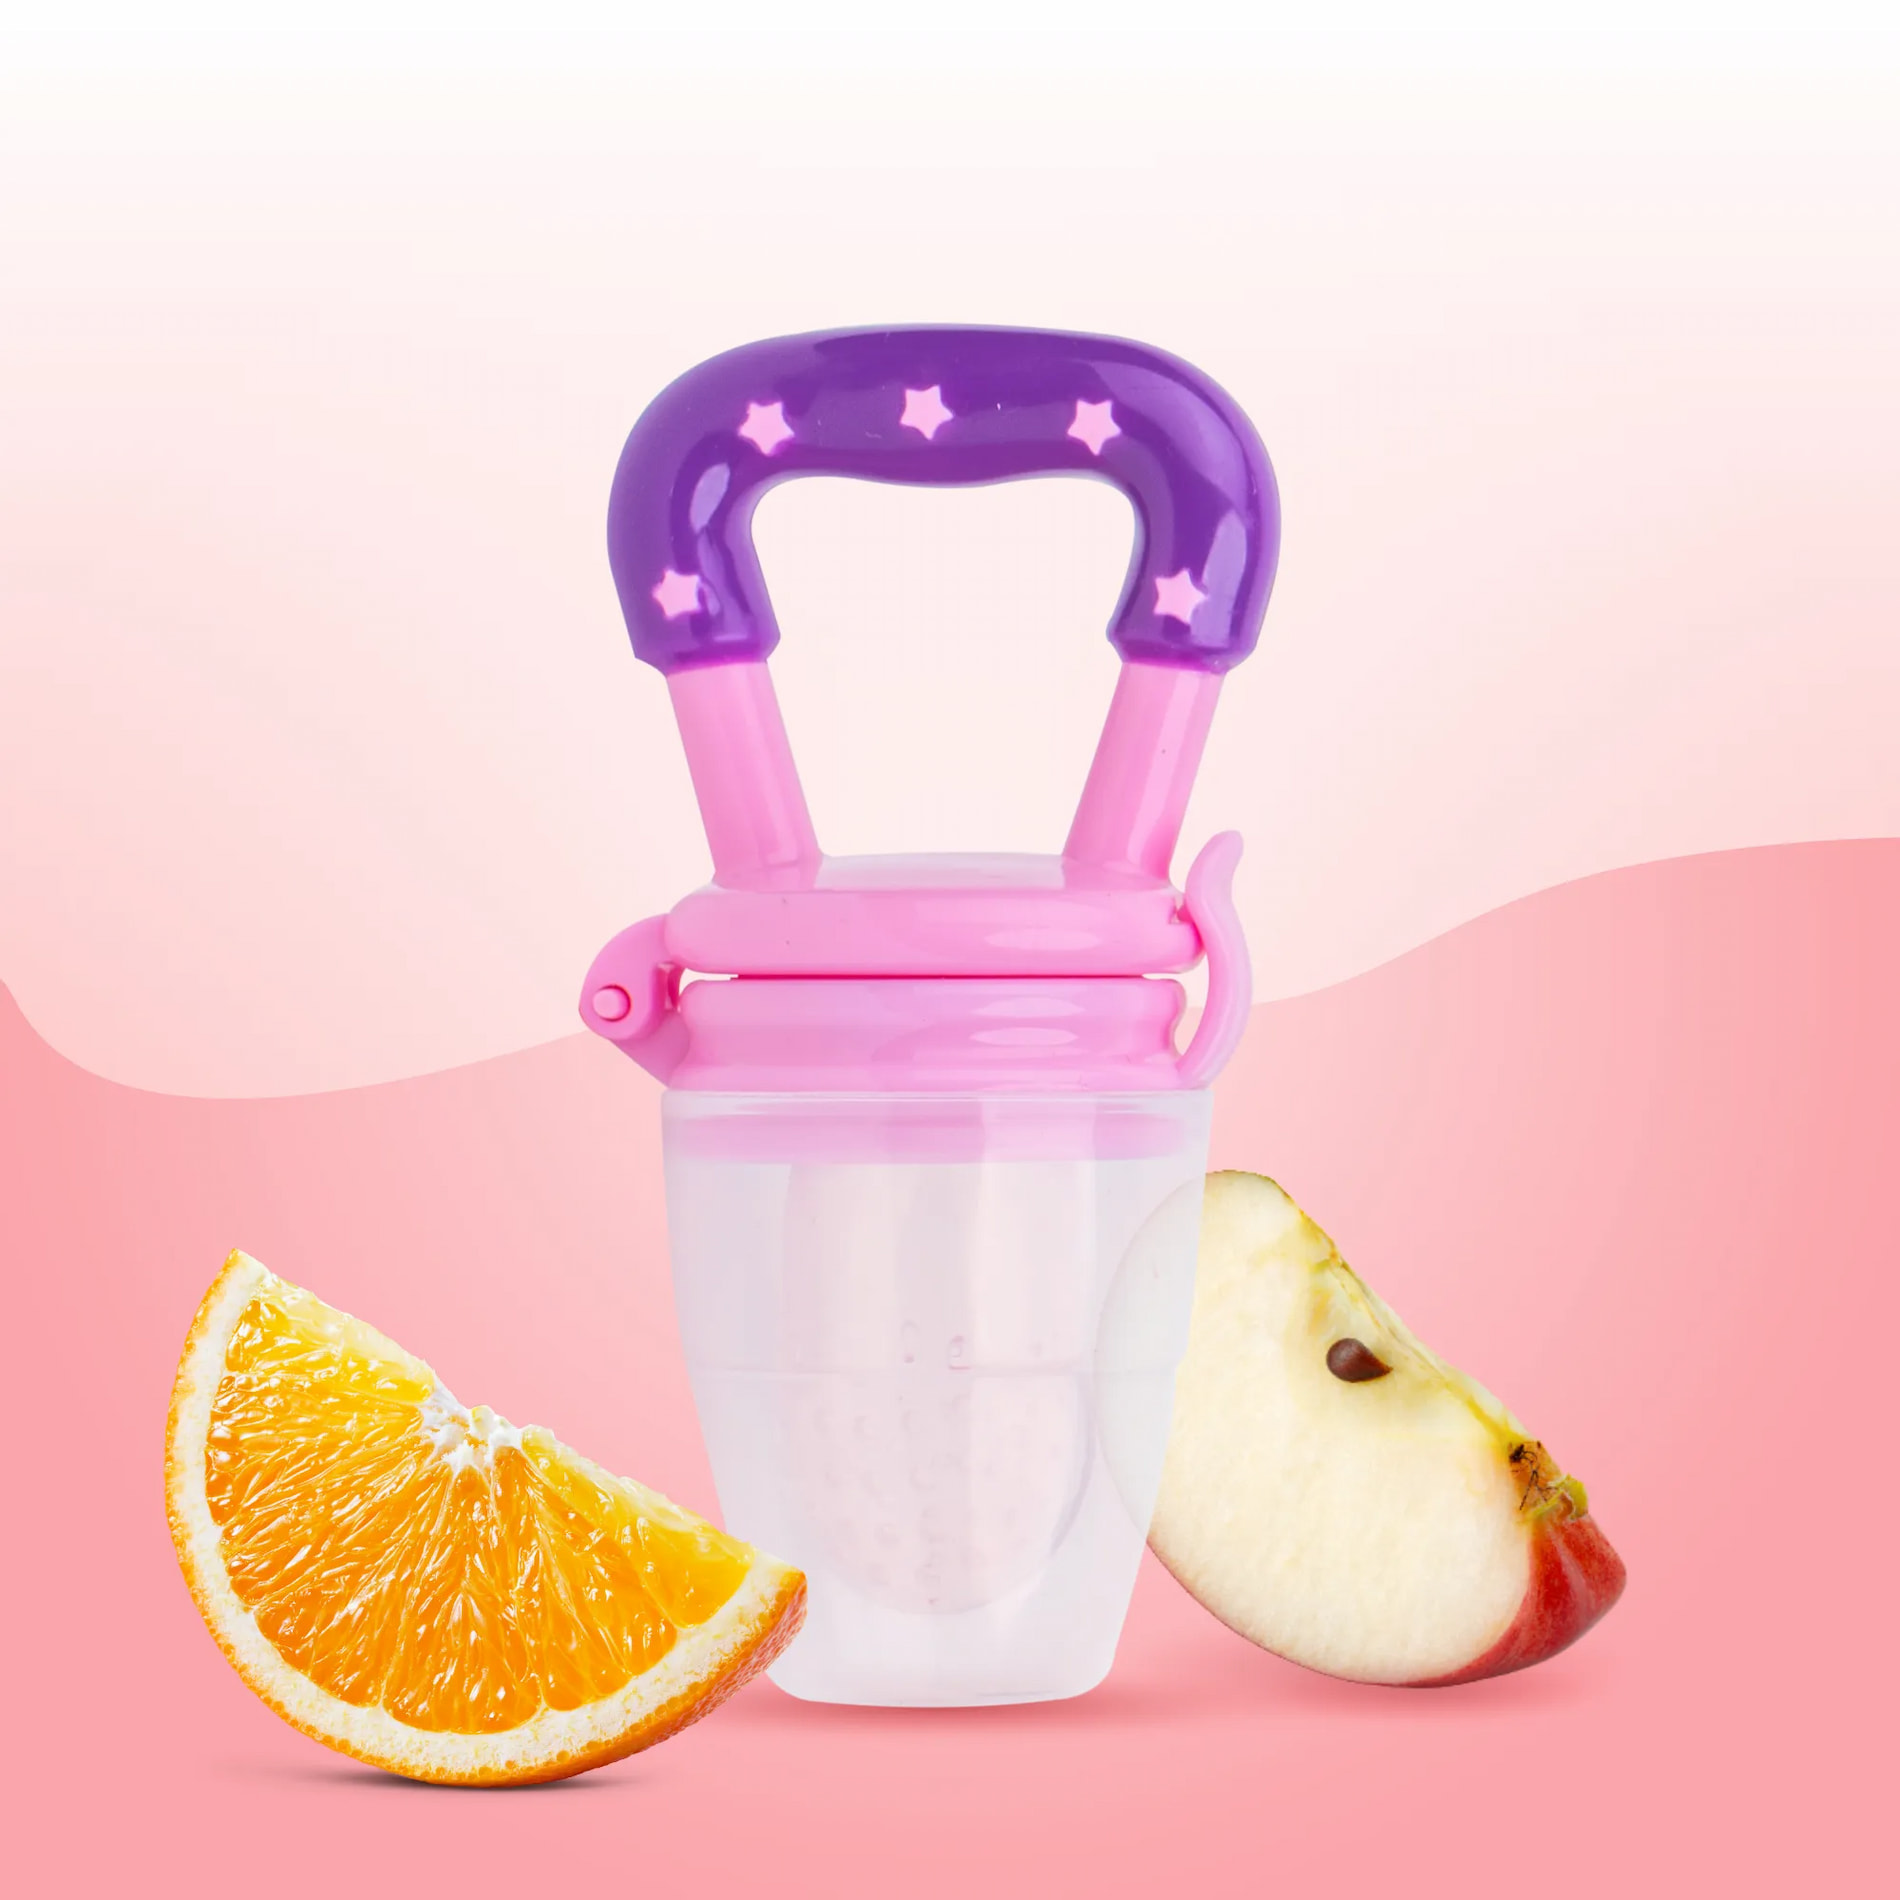 Feels Natural Ultra Soft Fruit & Food Nibbler- Pink | Convenient to Introduce Fruits & Veggies to Baby | Ultra-soft Silicone Mesh for Easy Chewing | Easy One Snap Filling | Helps Relieve Teething Discomfort